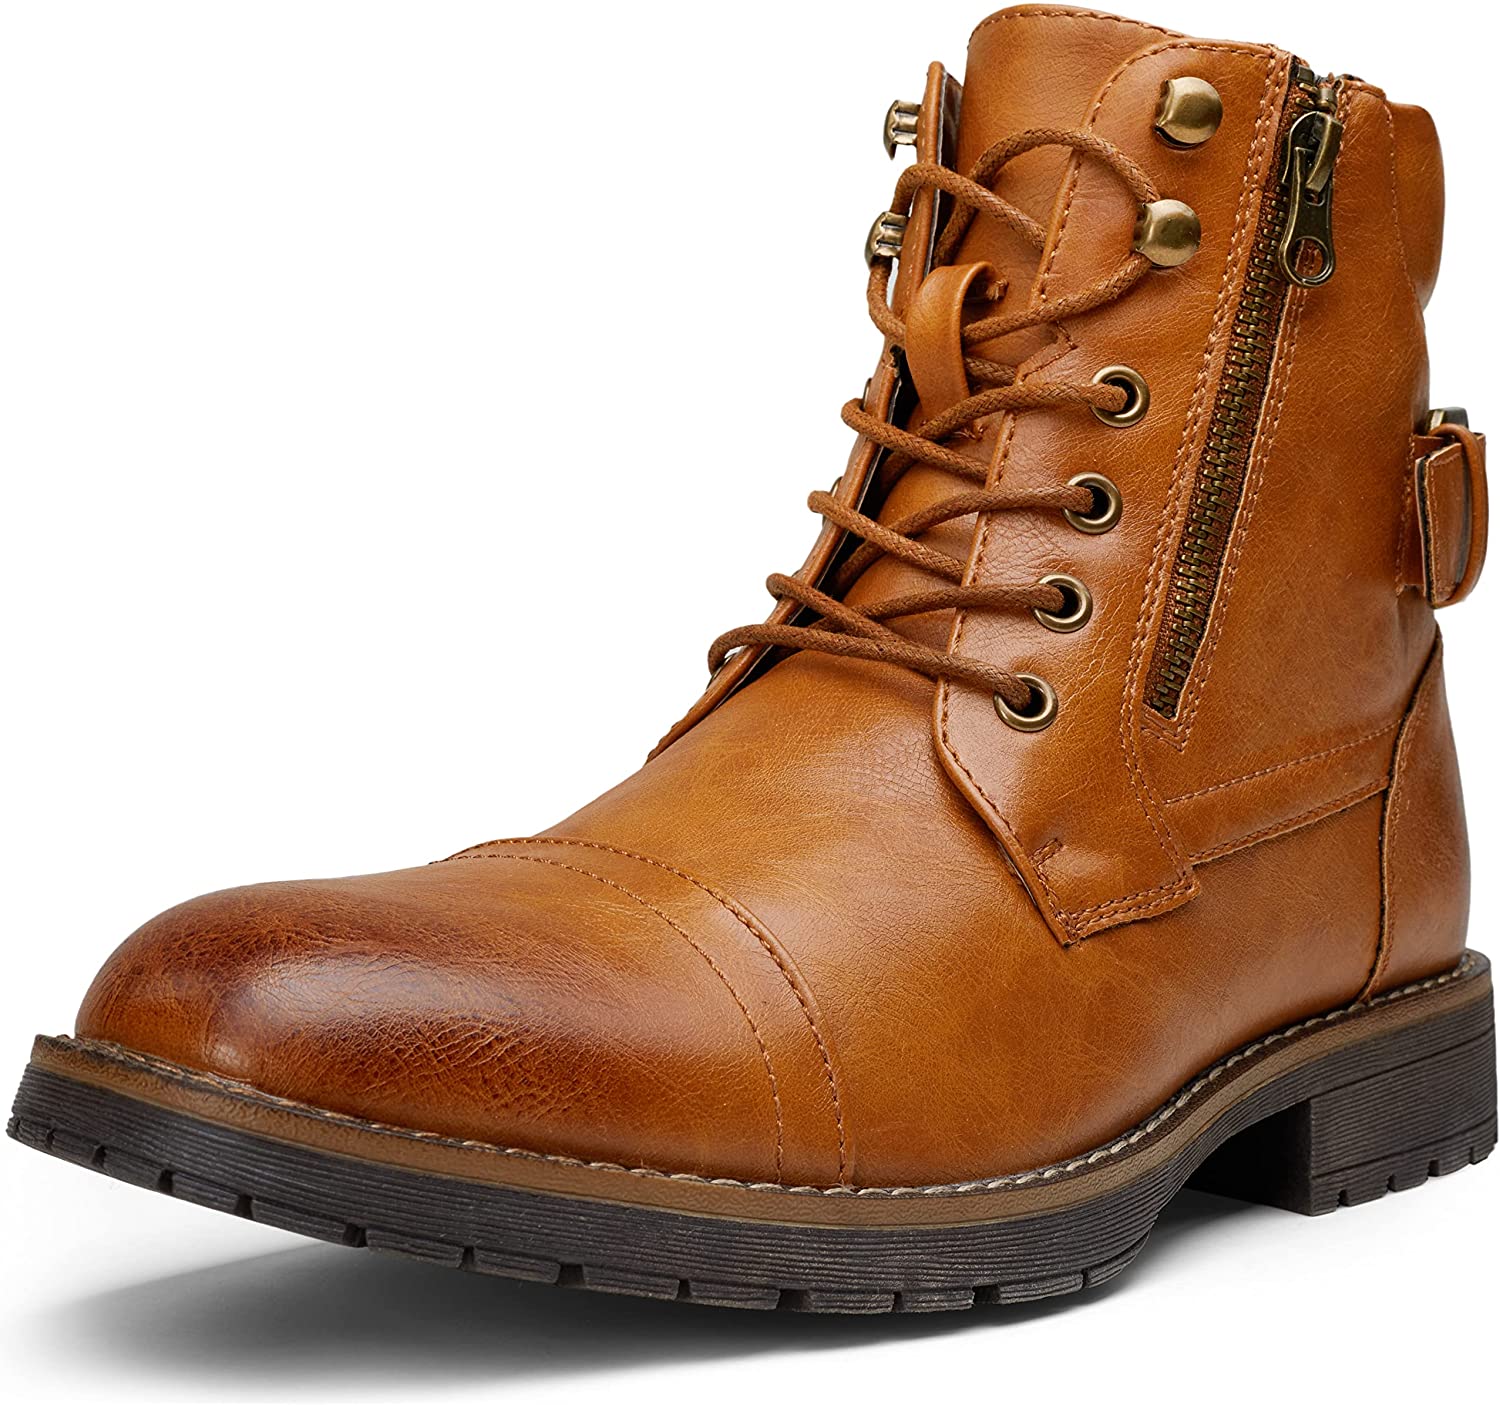 Vostey Men's Motorcycle Boots Business Casual Chukka Boot for Men 